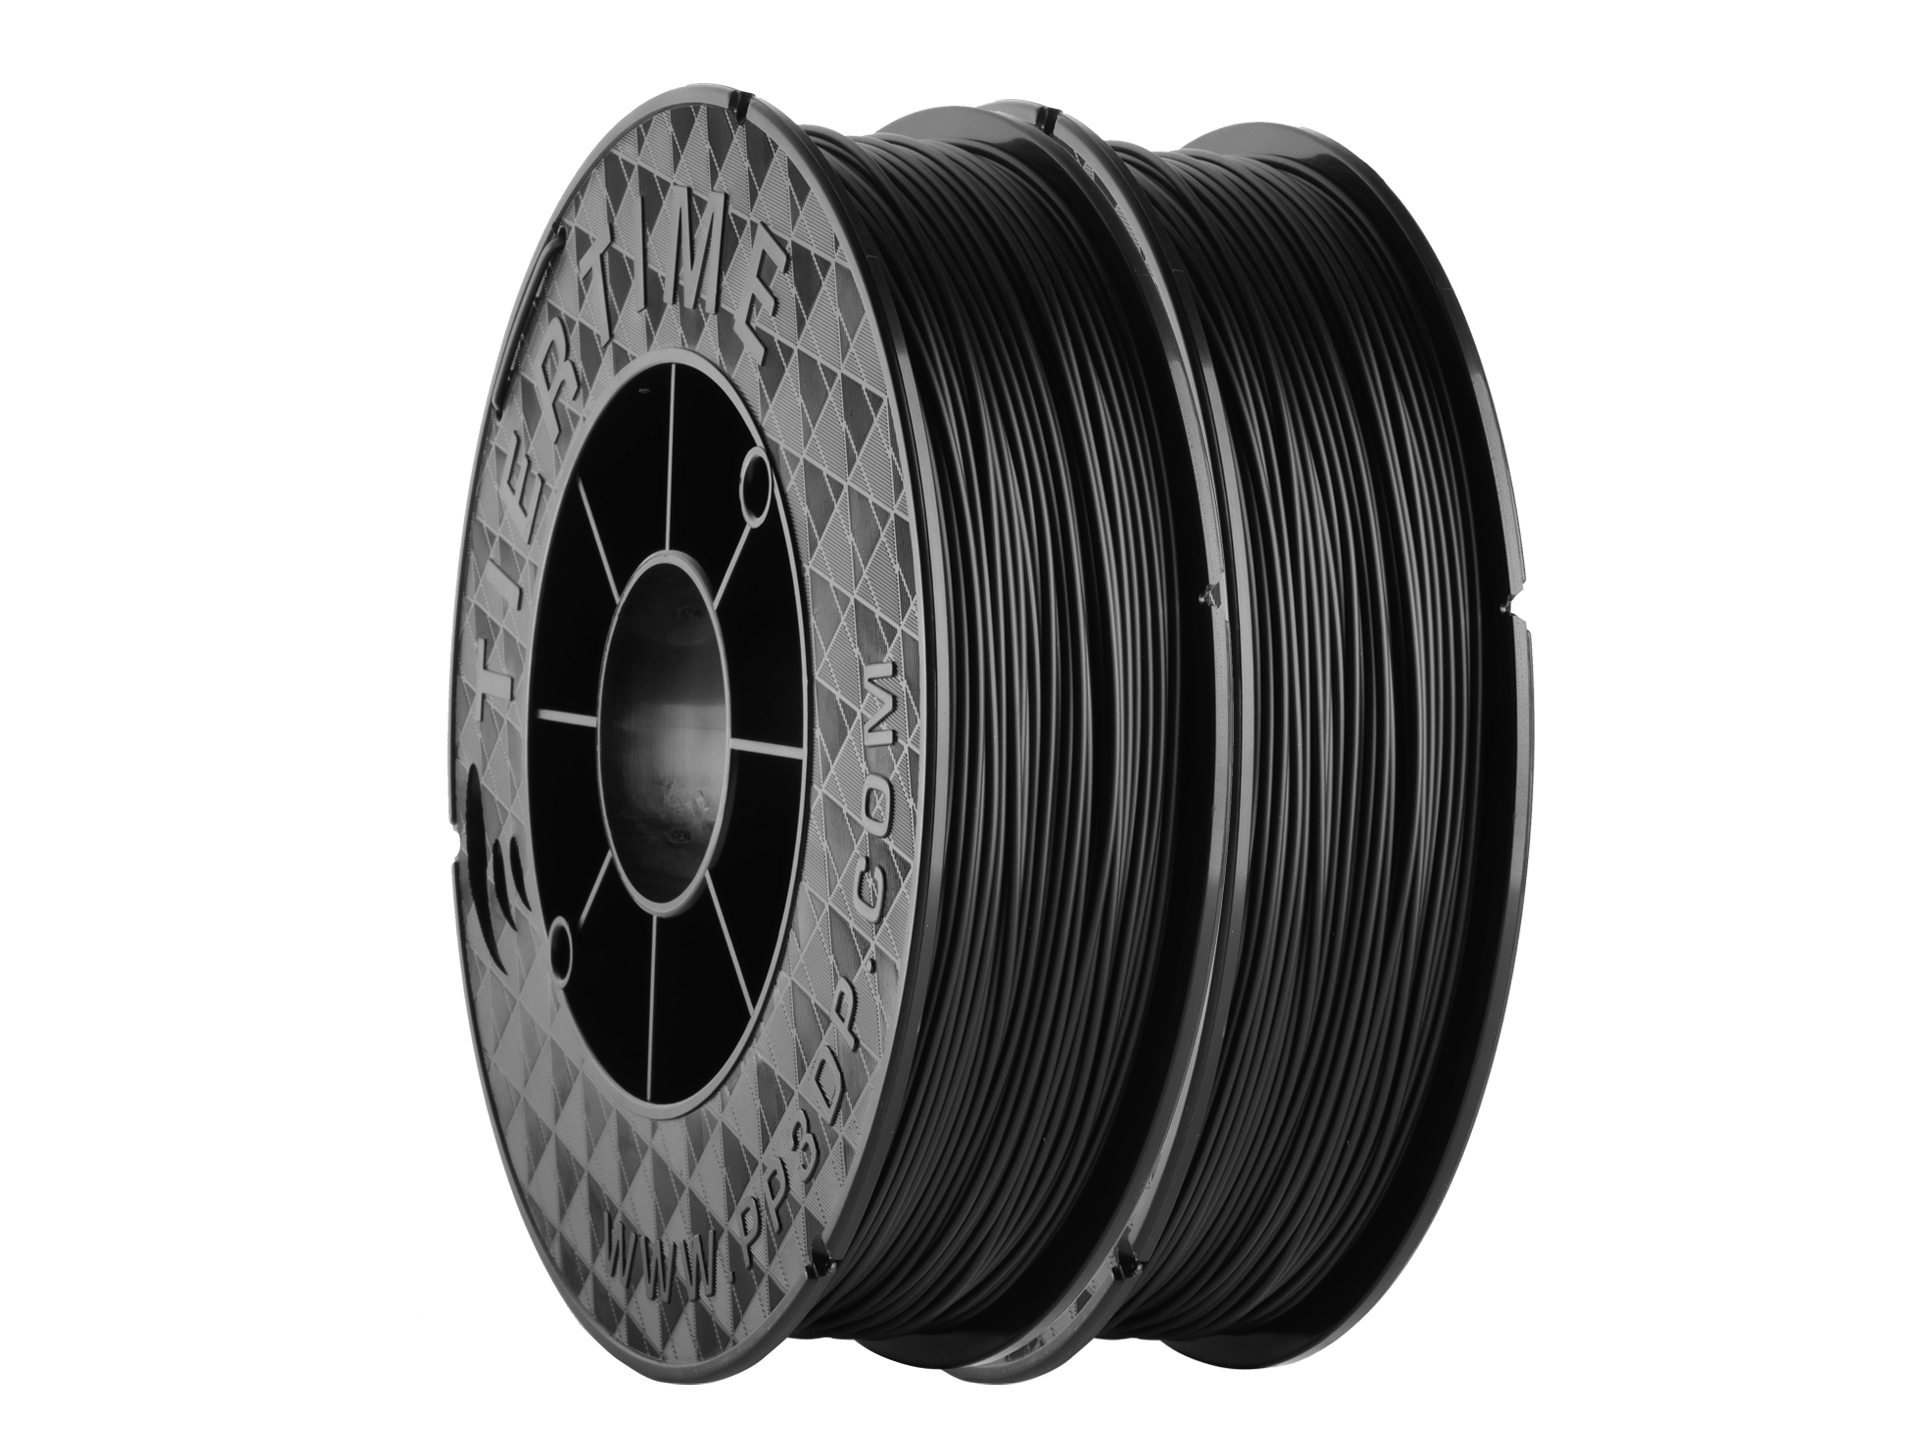 Black, White, Gray, Silver, 1.75mm ABS Filament 1.75mm, 500g x 4 Pack